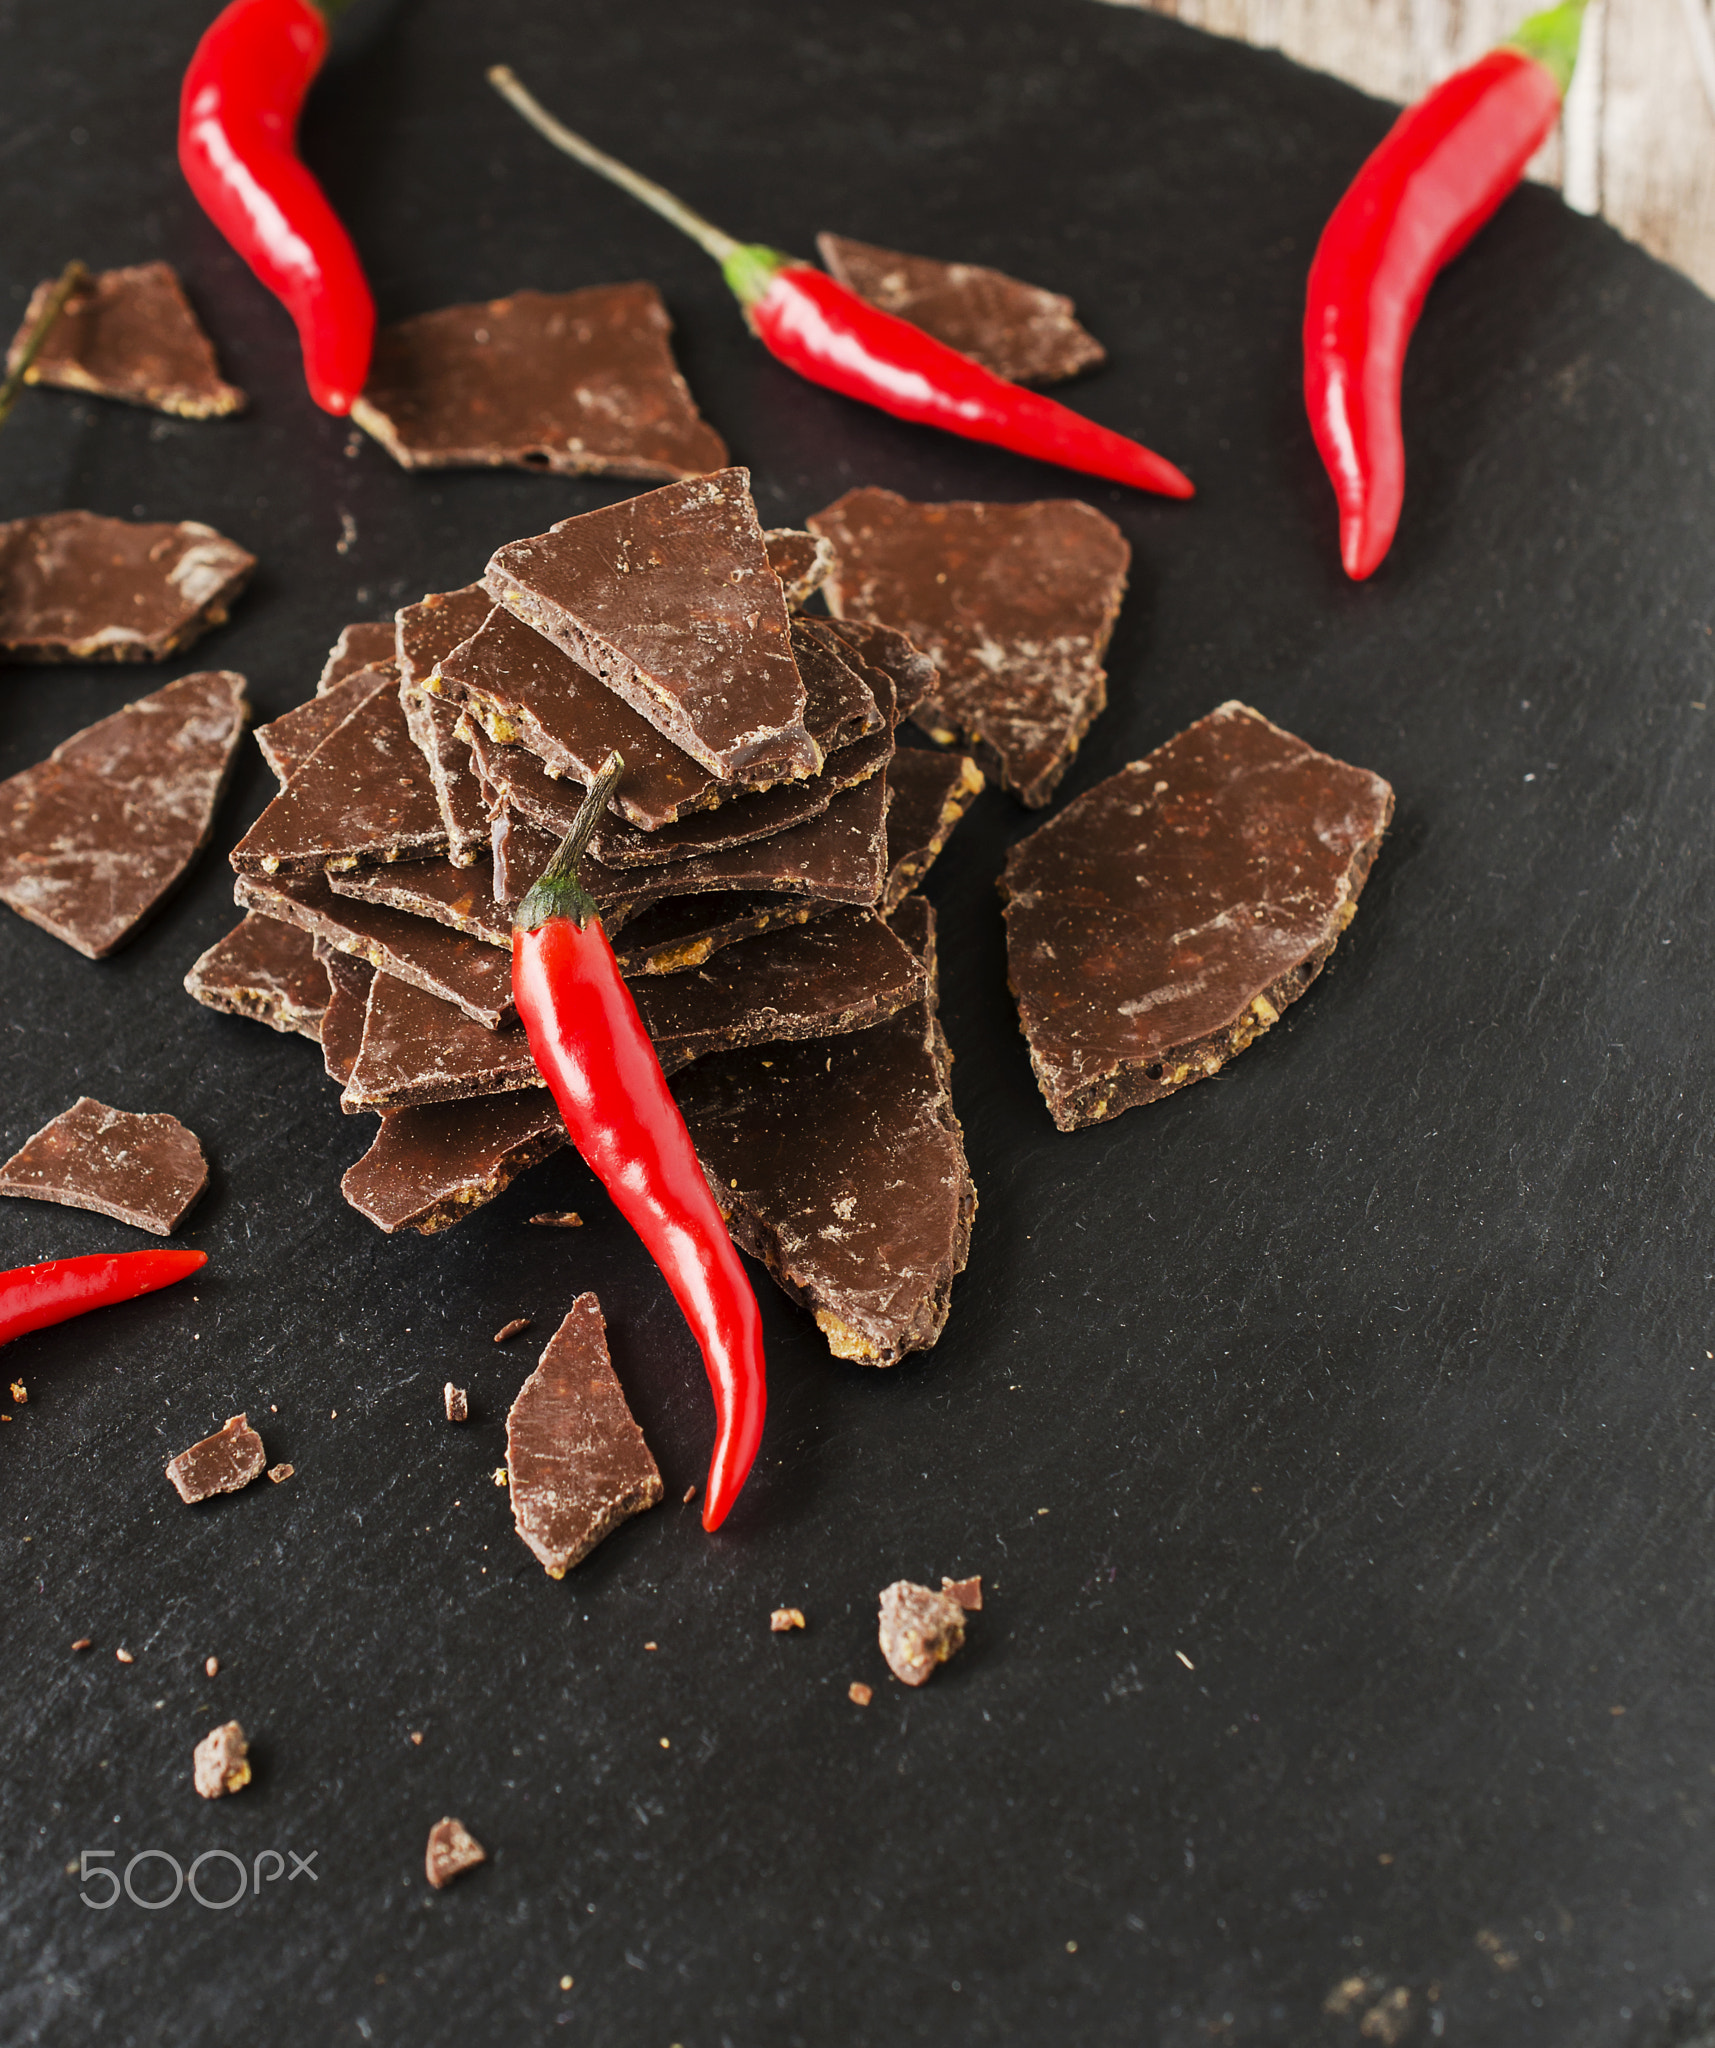 pieces of dark chocolate with chilli on black coal board